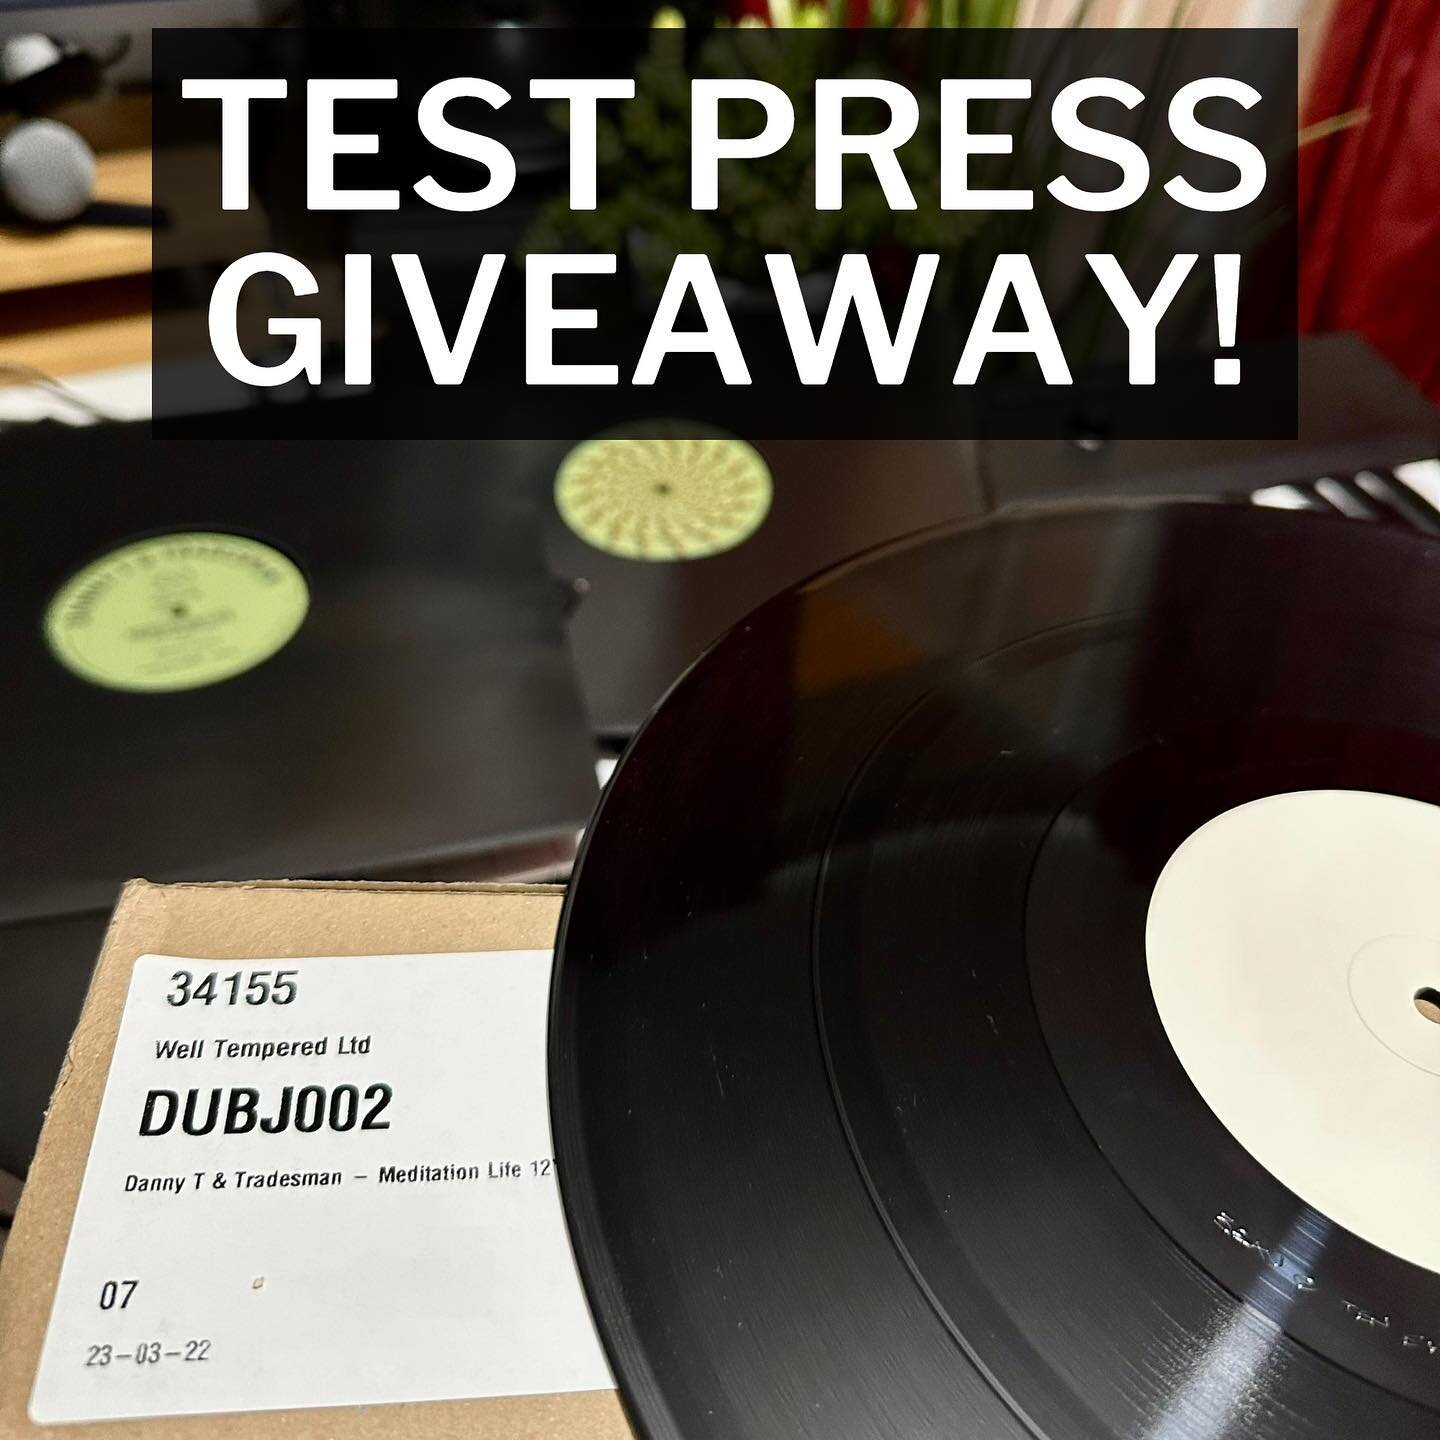 Win a free test press! Read on for all the info&hellip;

As we're down to the last box of 'Meditation Life' records, if you buy a copy during the next 7 days you'll be entered into a raffle to win this!

If you are not familiar, Meditation Life was o